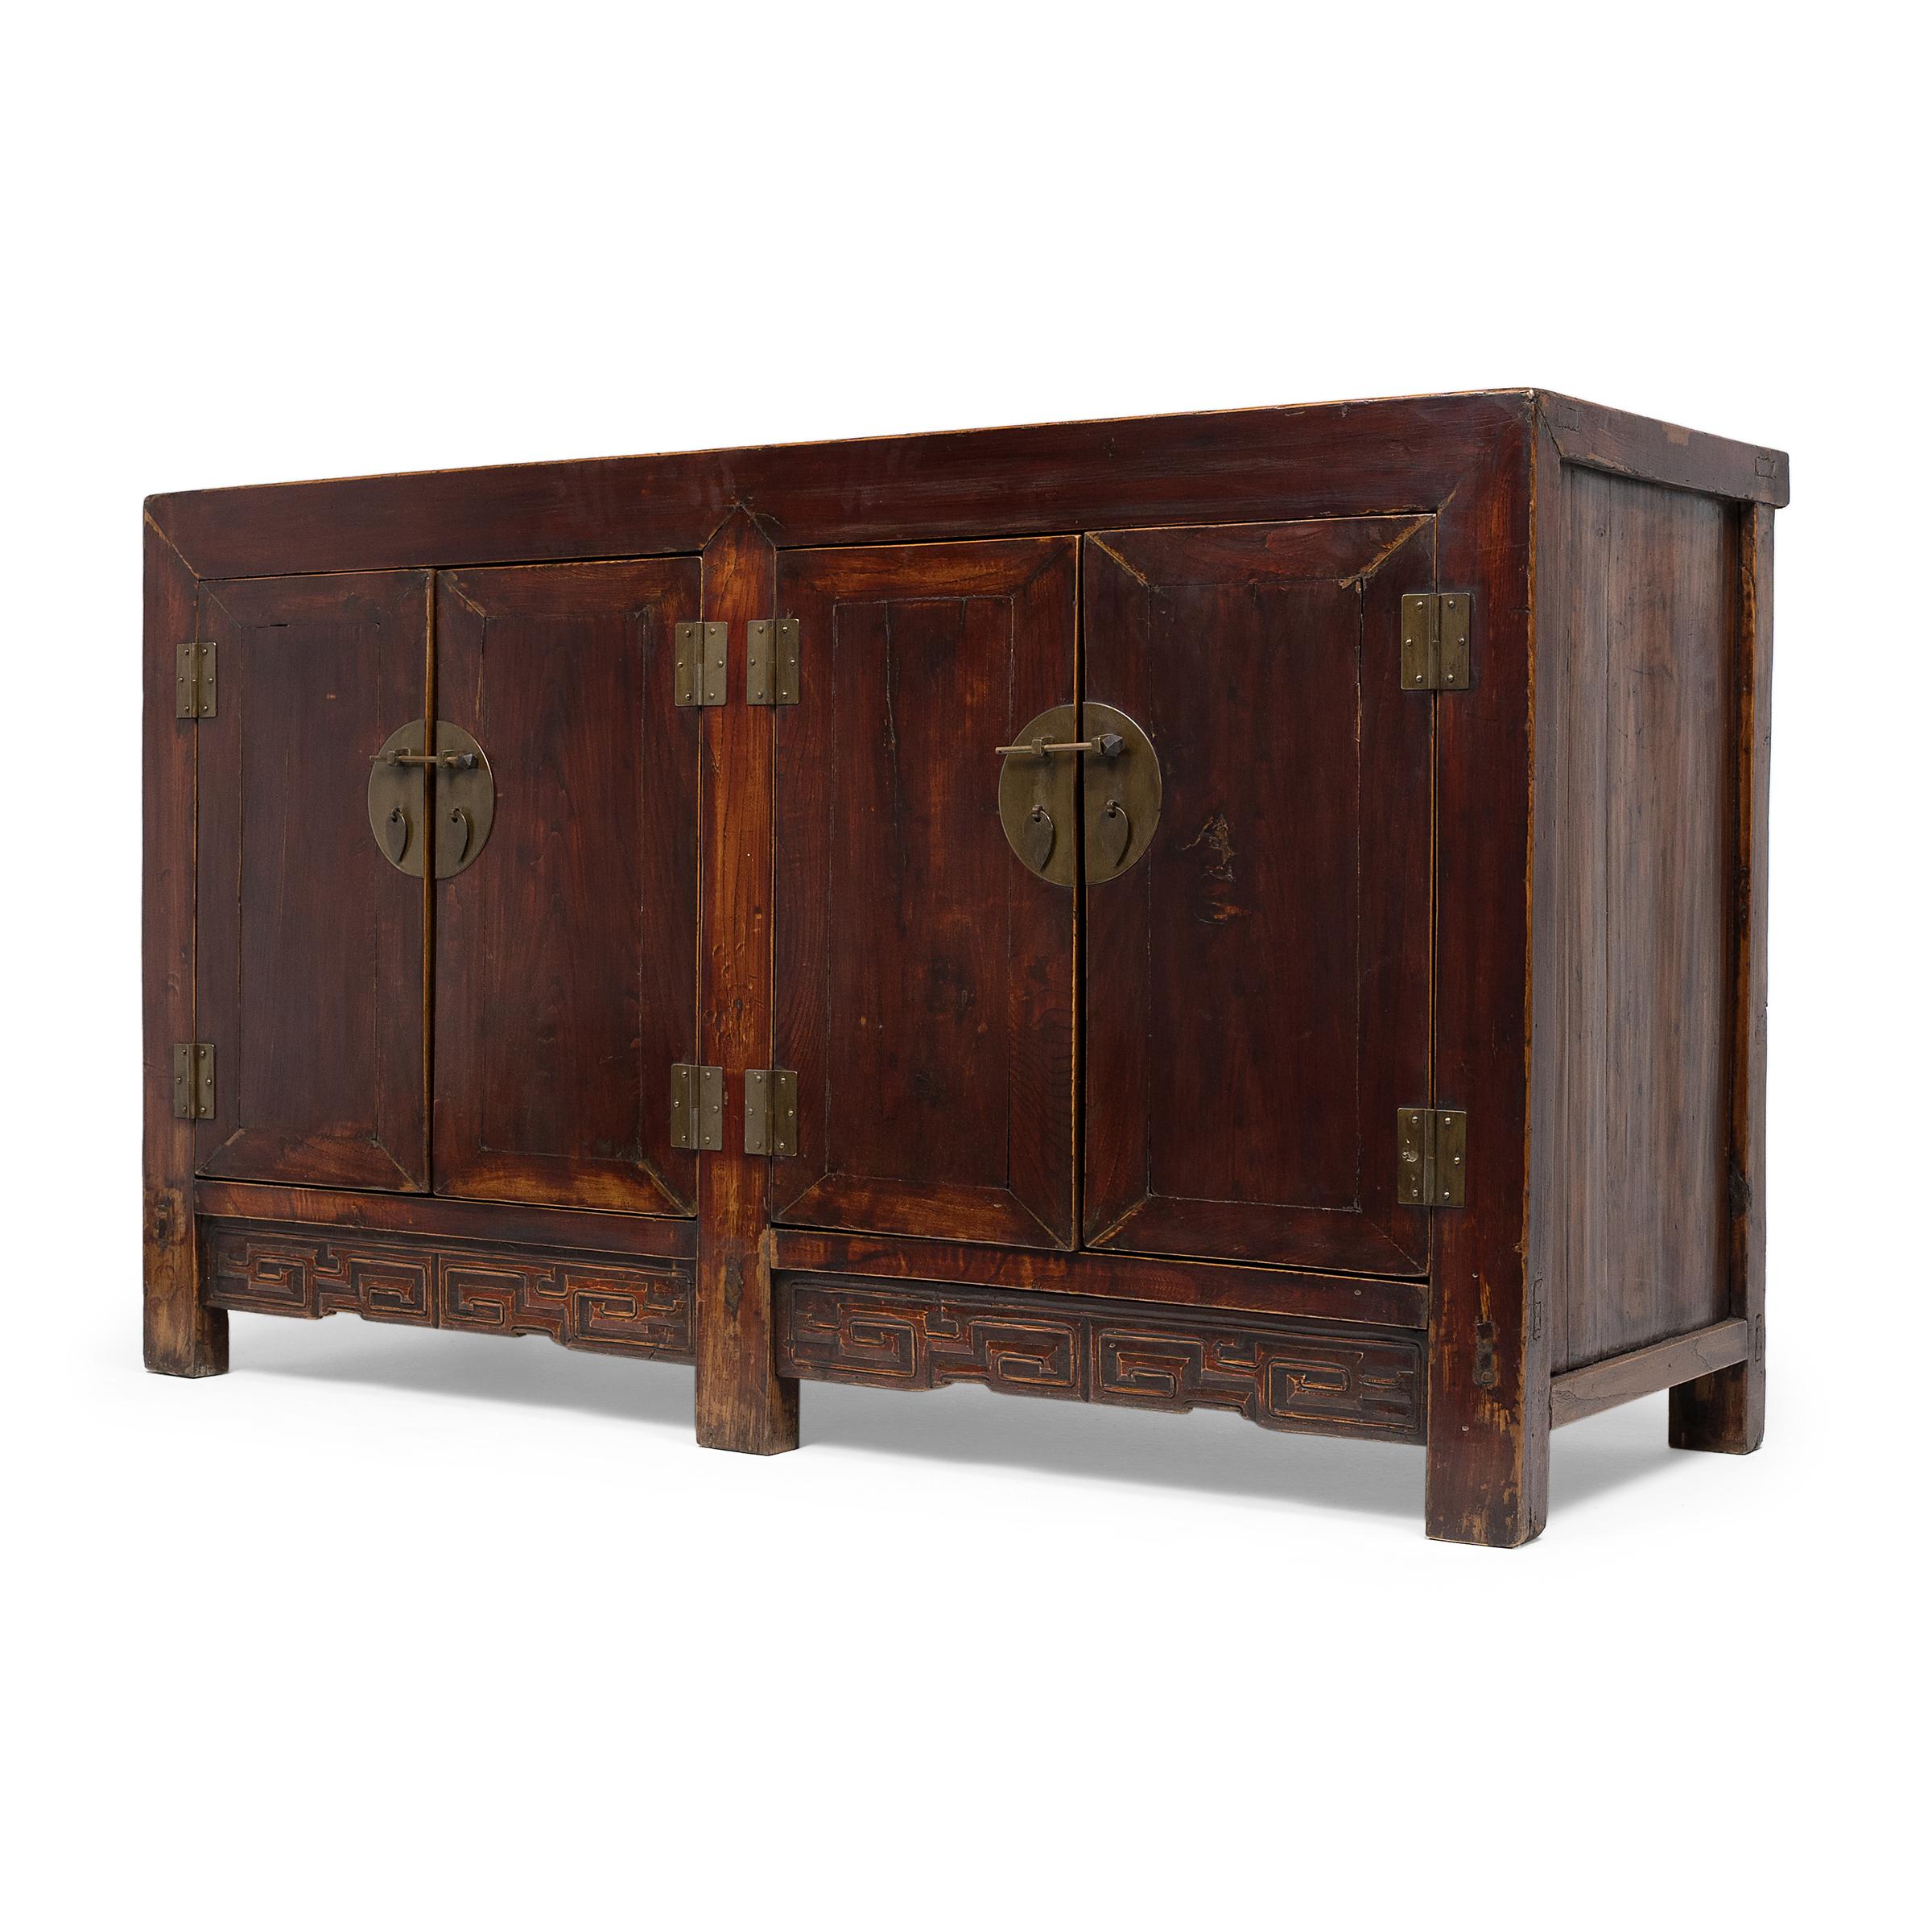 This 19th-century storage coffer is expertly crafted of northern elm (yumu) using traditional mortise-and-tenon joinery methods. The square-corner cabinet is built with two sets of doors that open to a large interior fitted with four drawers and a